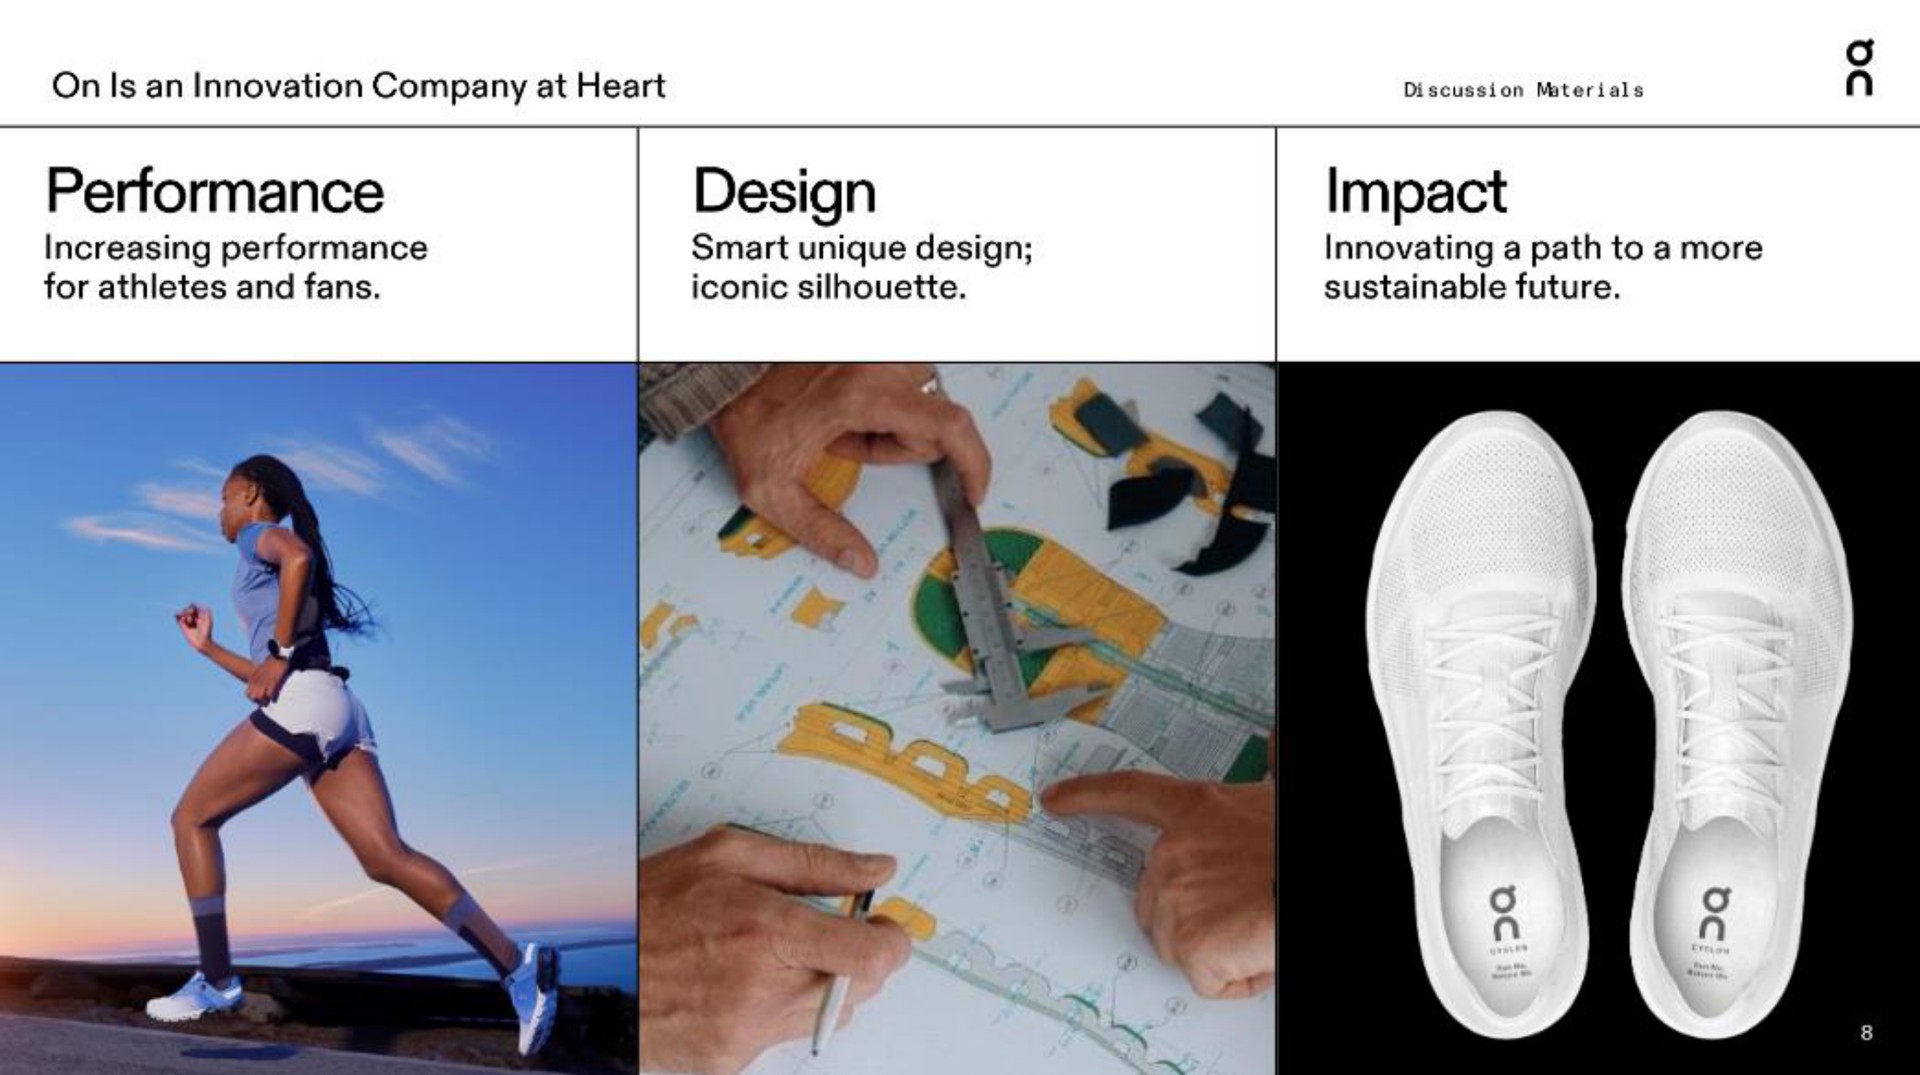 on is an innovation company at heart performance increasing performance for athletes and fans design smart unique design iconic silhouette impact innovating a path to a more sustainable future | On Holding